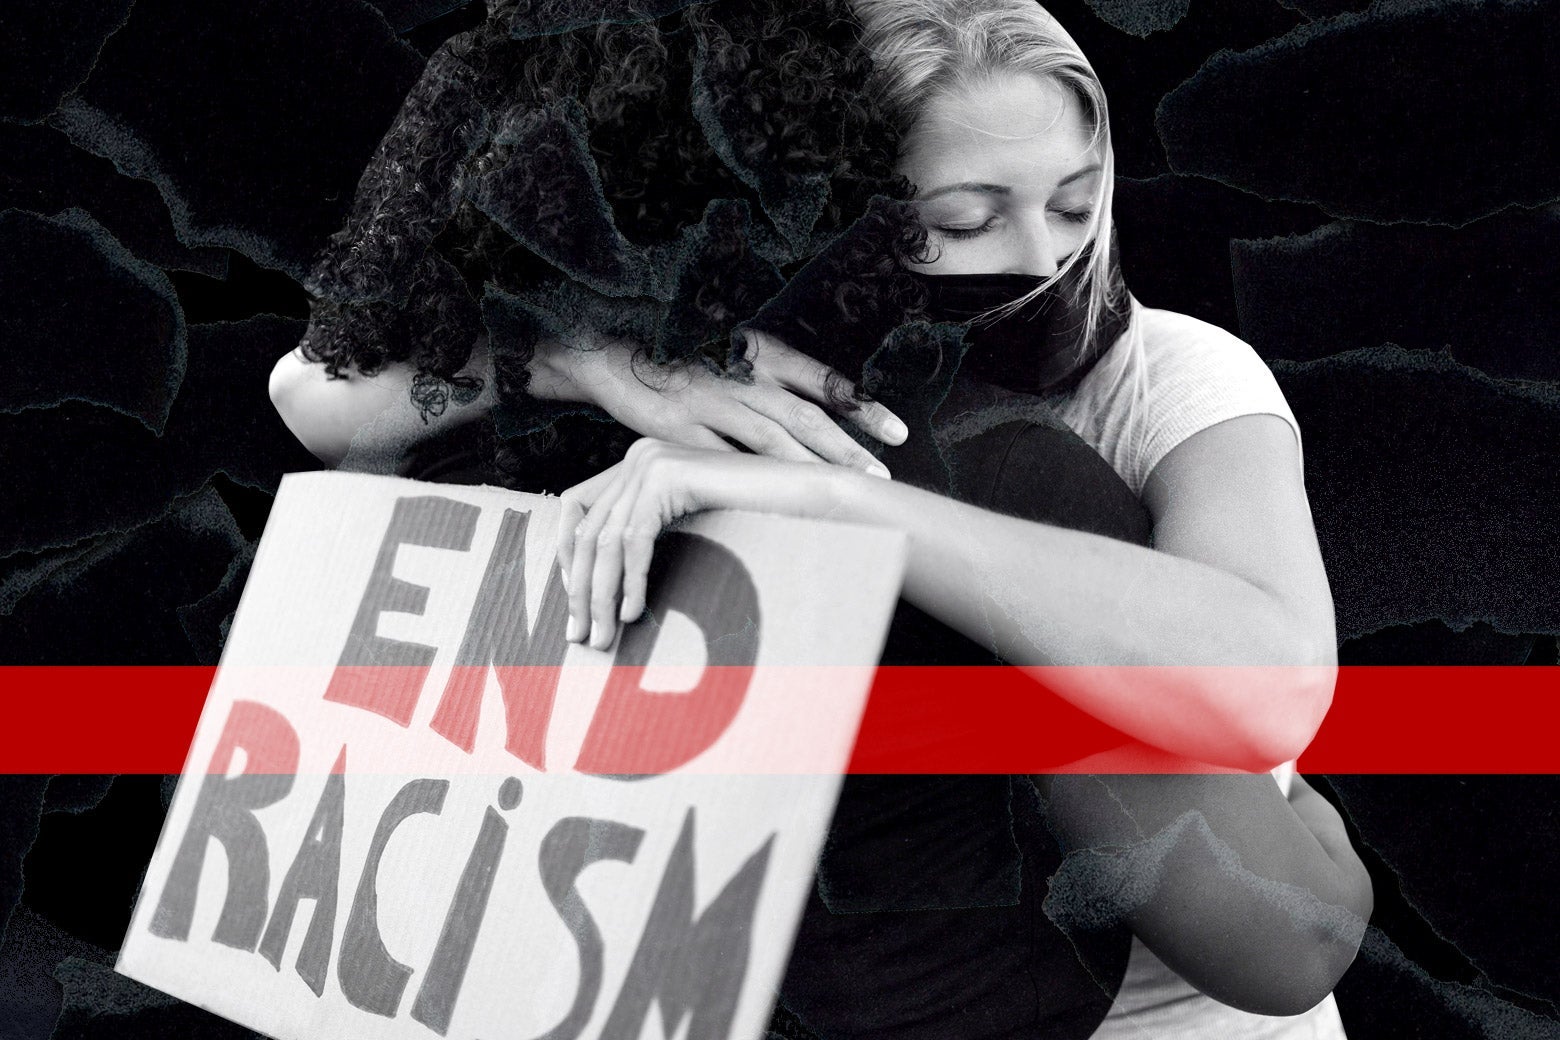 A white woman with an "End Racism" sign hugs a Black woman.